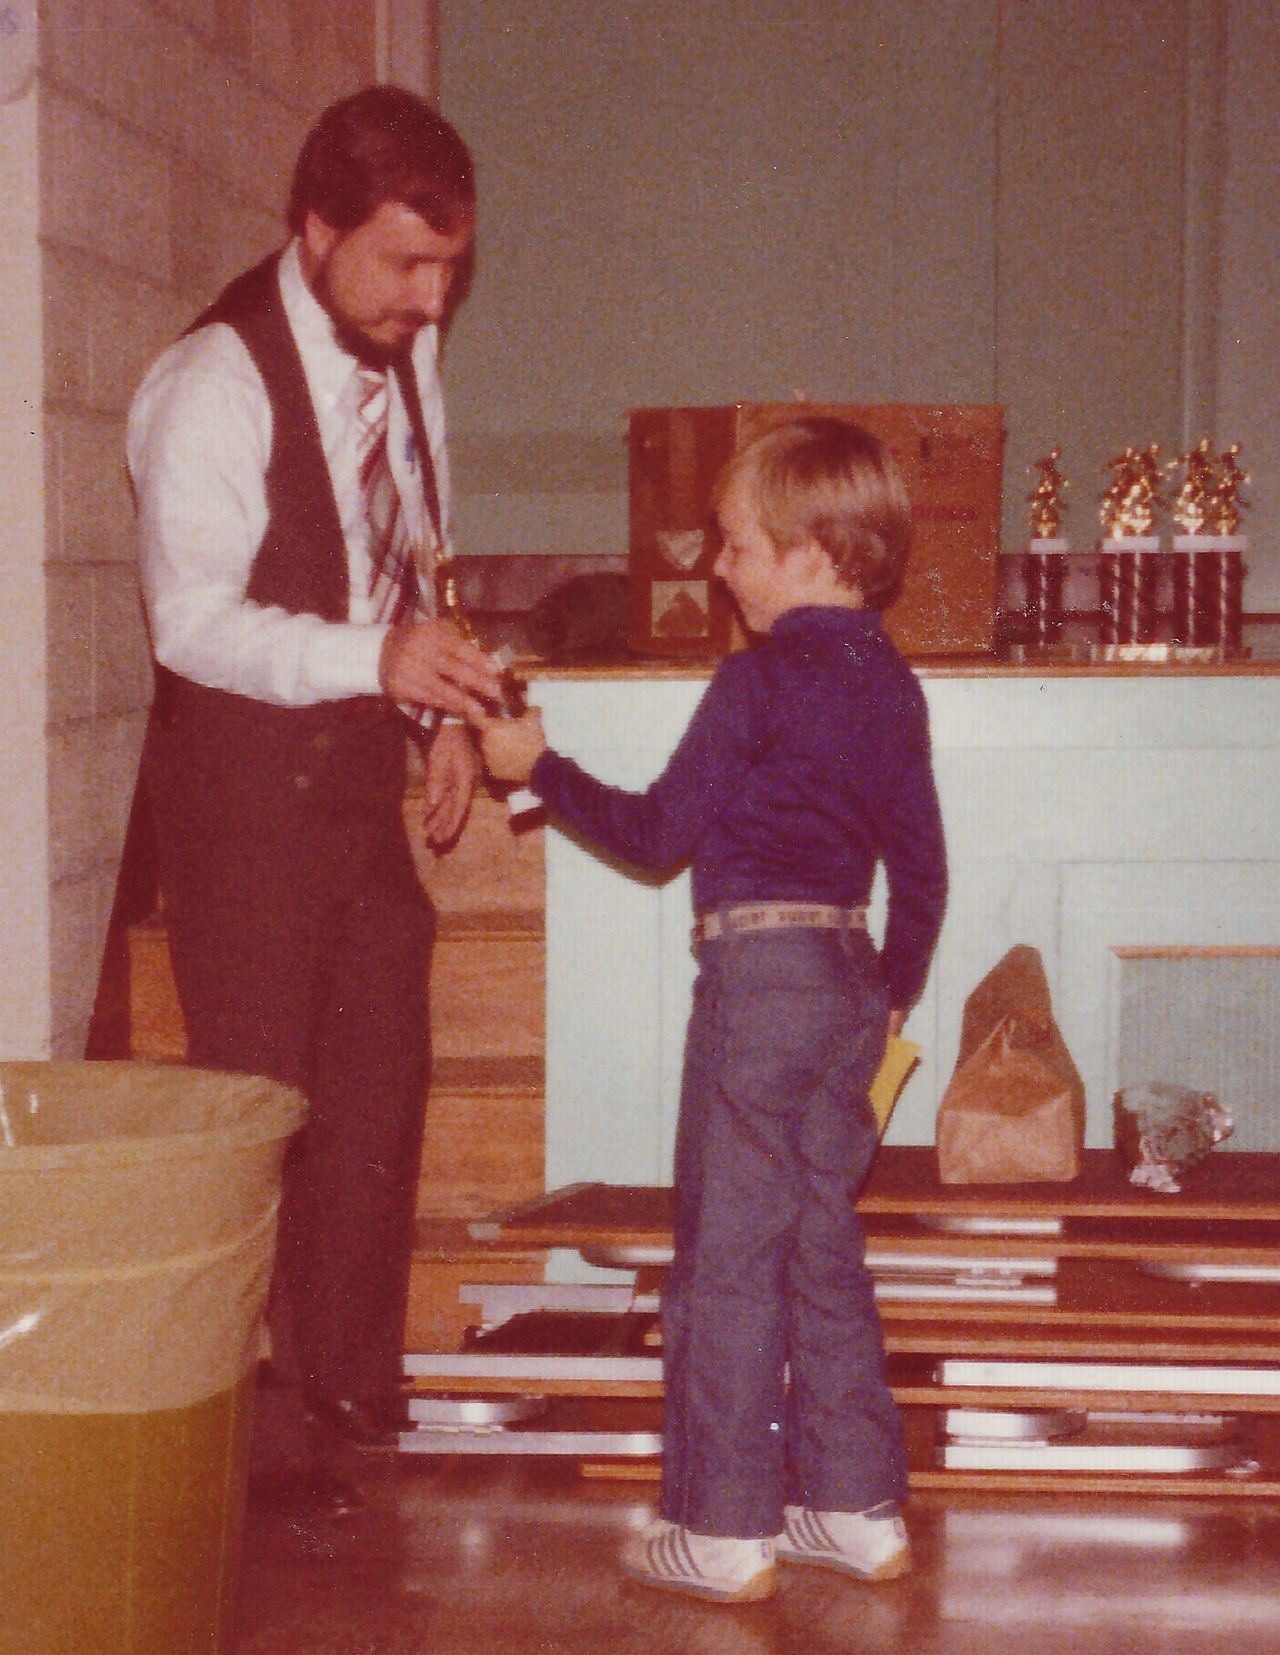 Josh receiving a soccer trophy from his father